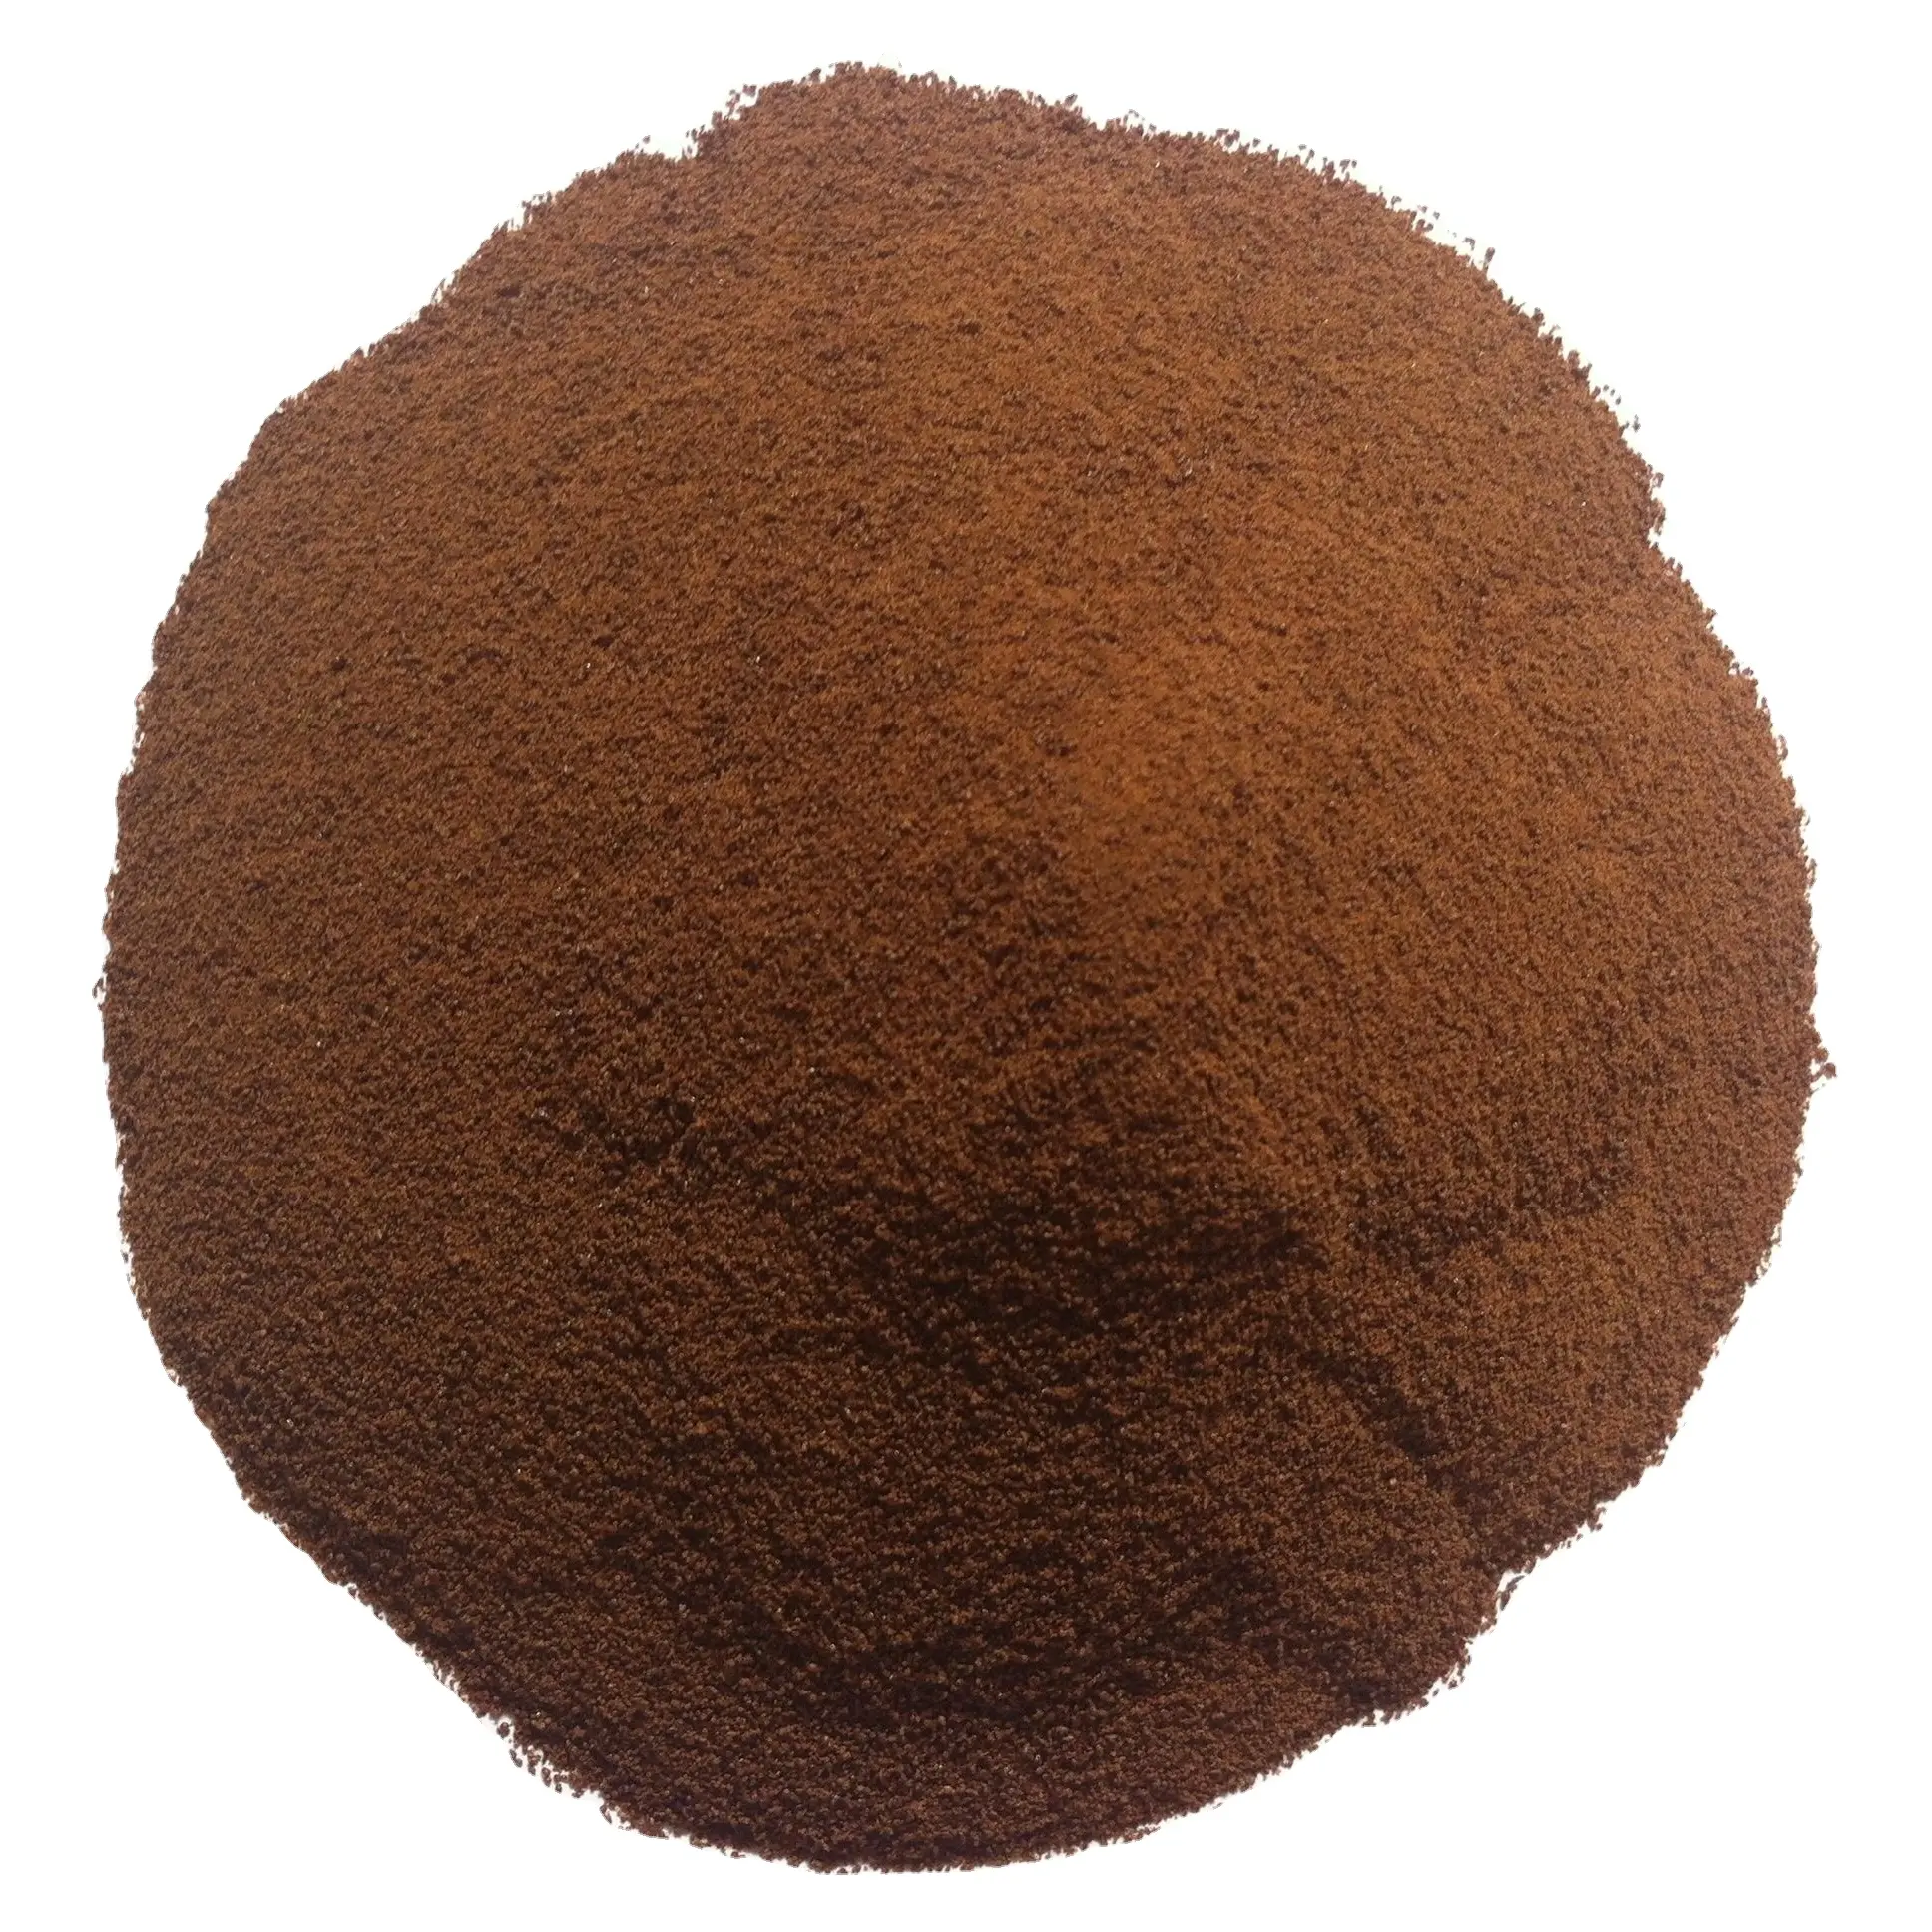 Hot selling product High quality Instant coffee powder supplier coffee coffee freeze dried process with high caffeine